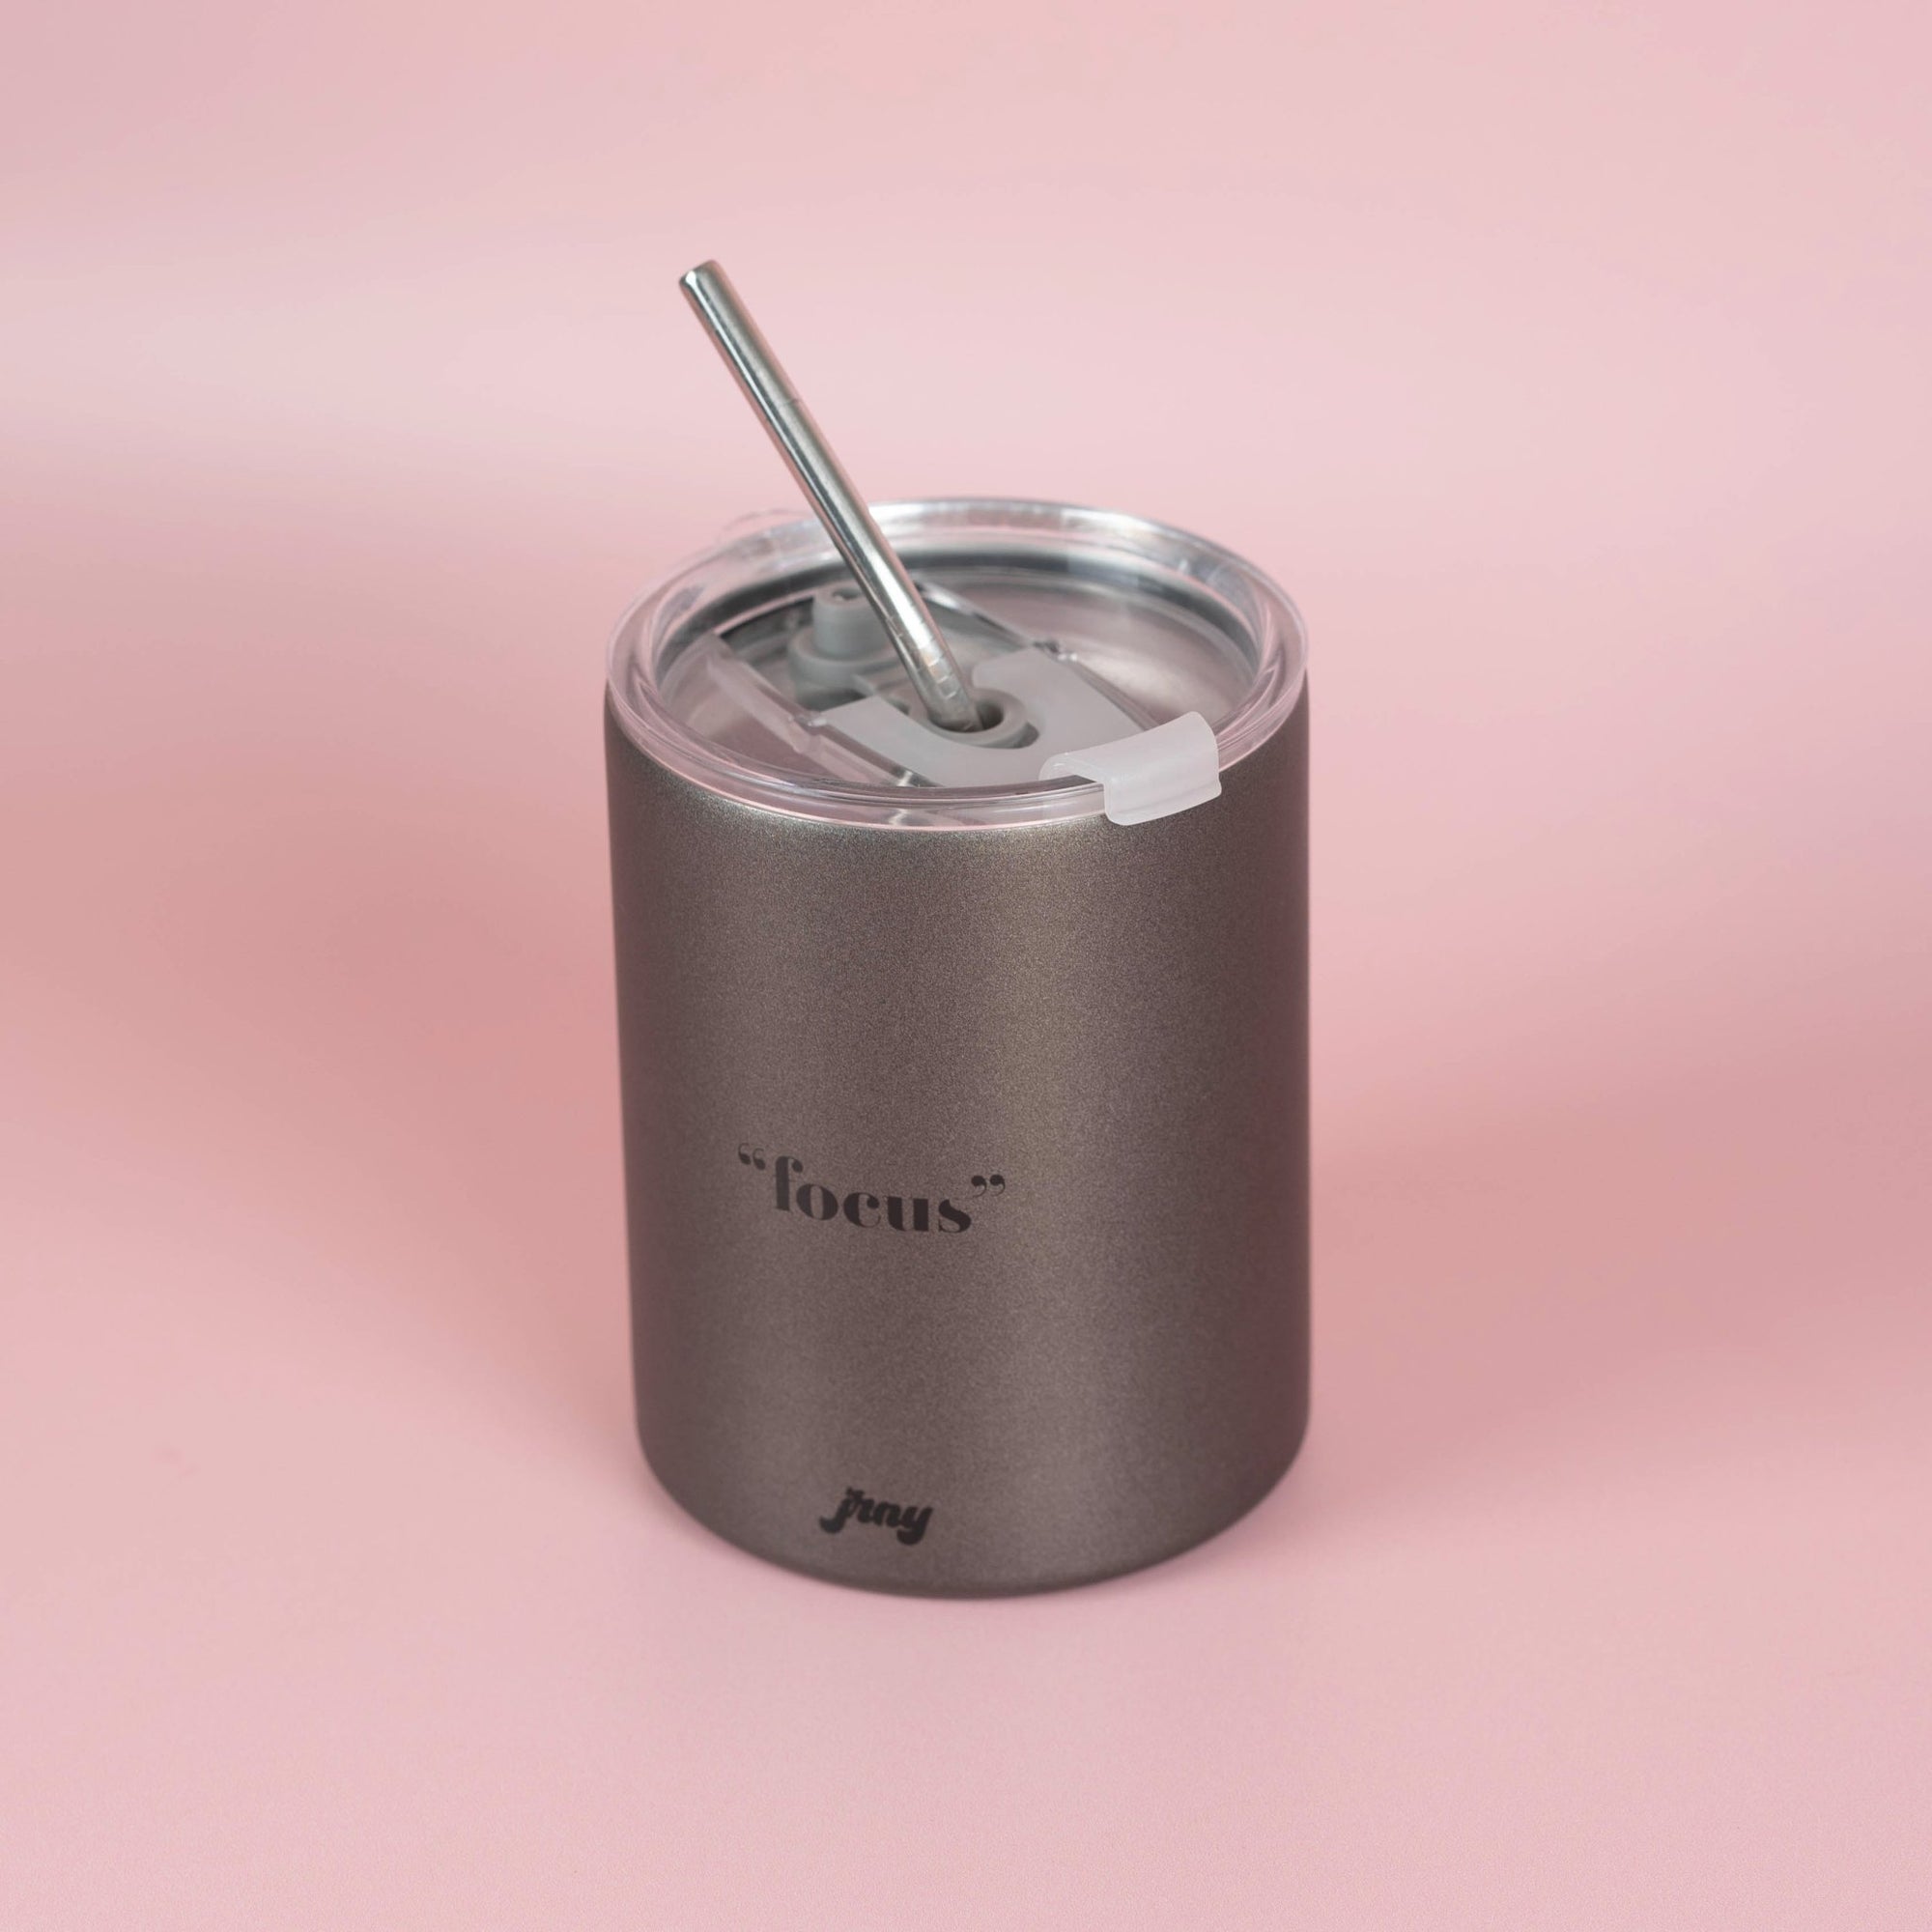 Stainless Steel Insulated "Focus" Mug - jrny